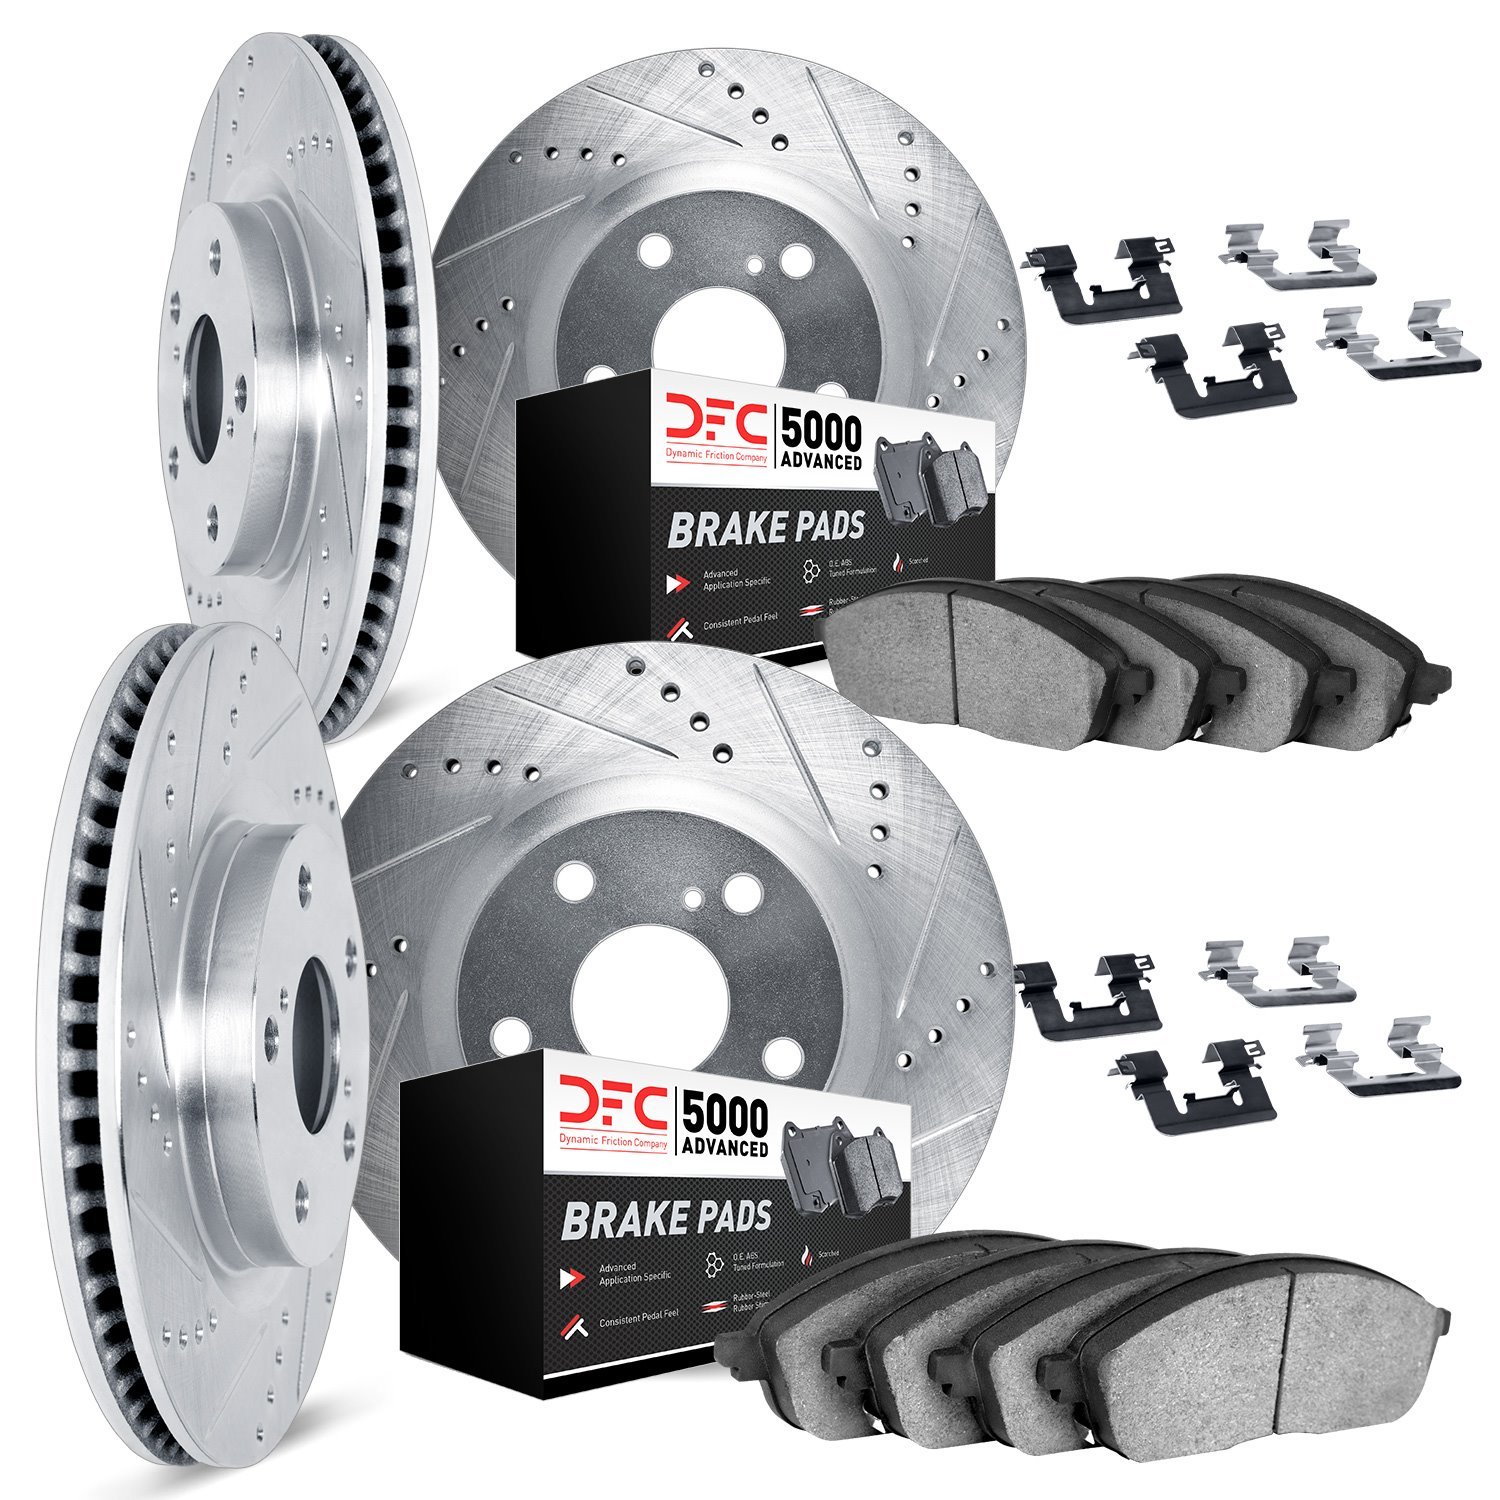 7514-31013 Drilled/Slotted Brake Rotors w/5000 Advanced Brake Pads Kit & Hardware [Silver], 2004-2010 BMW, Position: Front and R